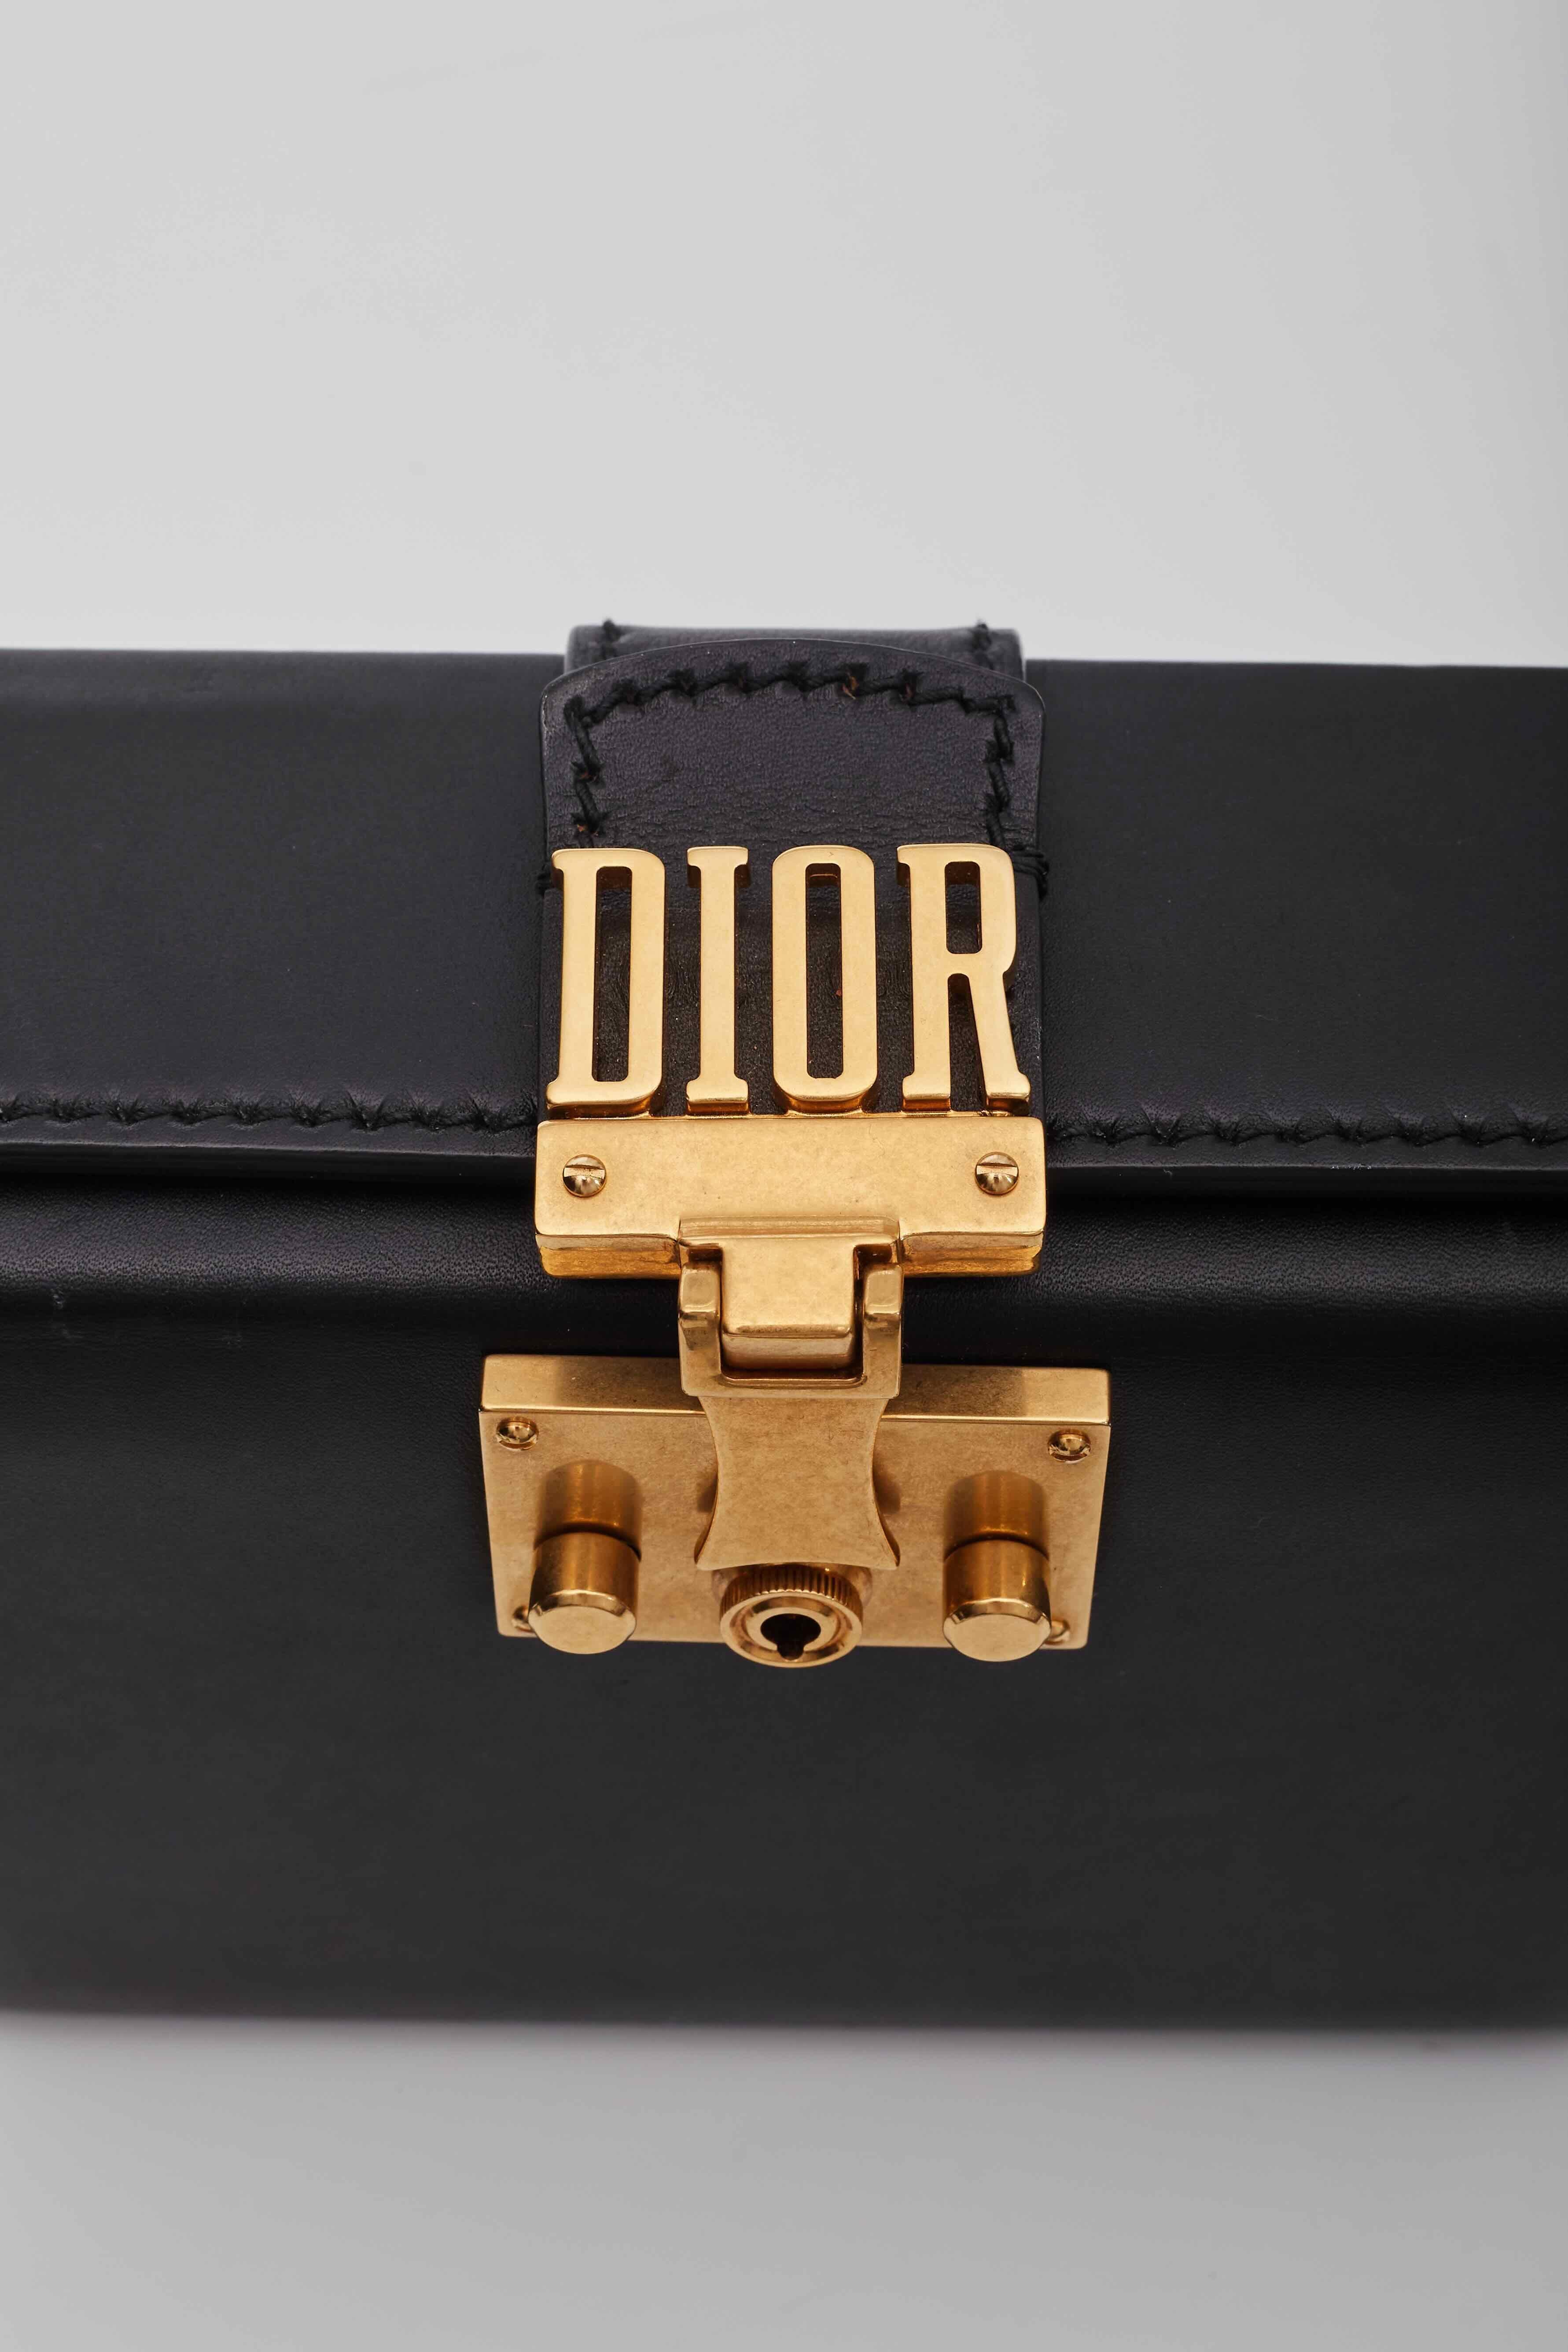 Christian Dior Shoulder Bag. From the 2017 Collection. Black Leather. Brass Hardware. Single Adjustable Shoulder Strap. Single Exterior Pocket. Suede Lining with Card Slots. Push-Lock Closure at Front.

Color: Black
Material: Leather
Measures: